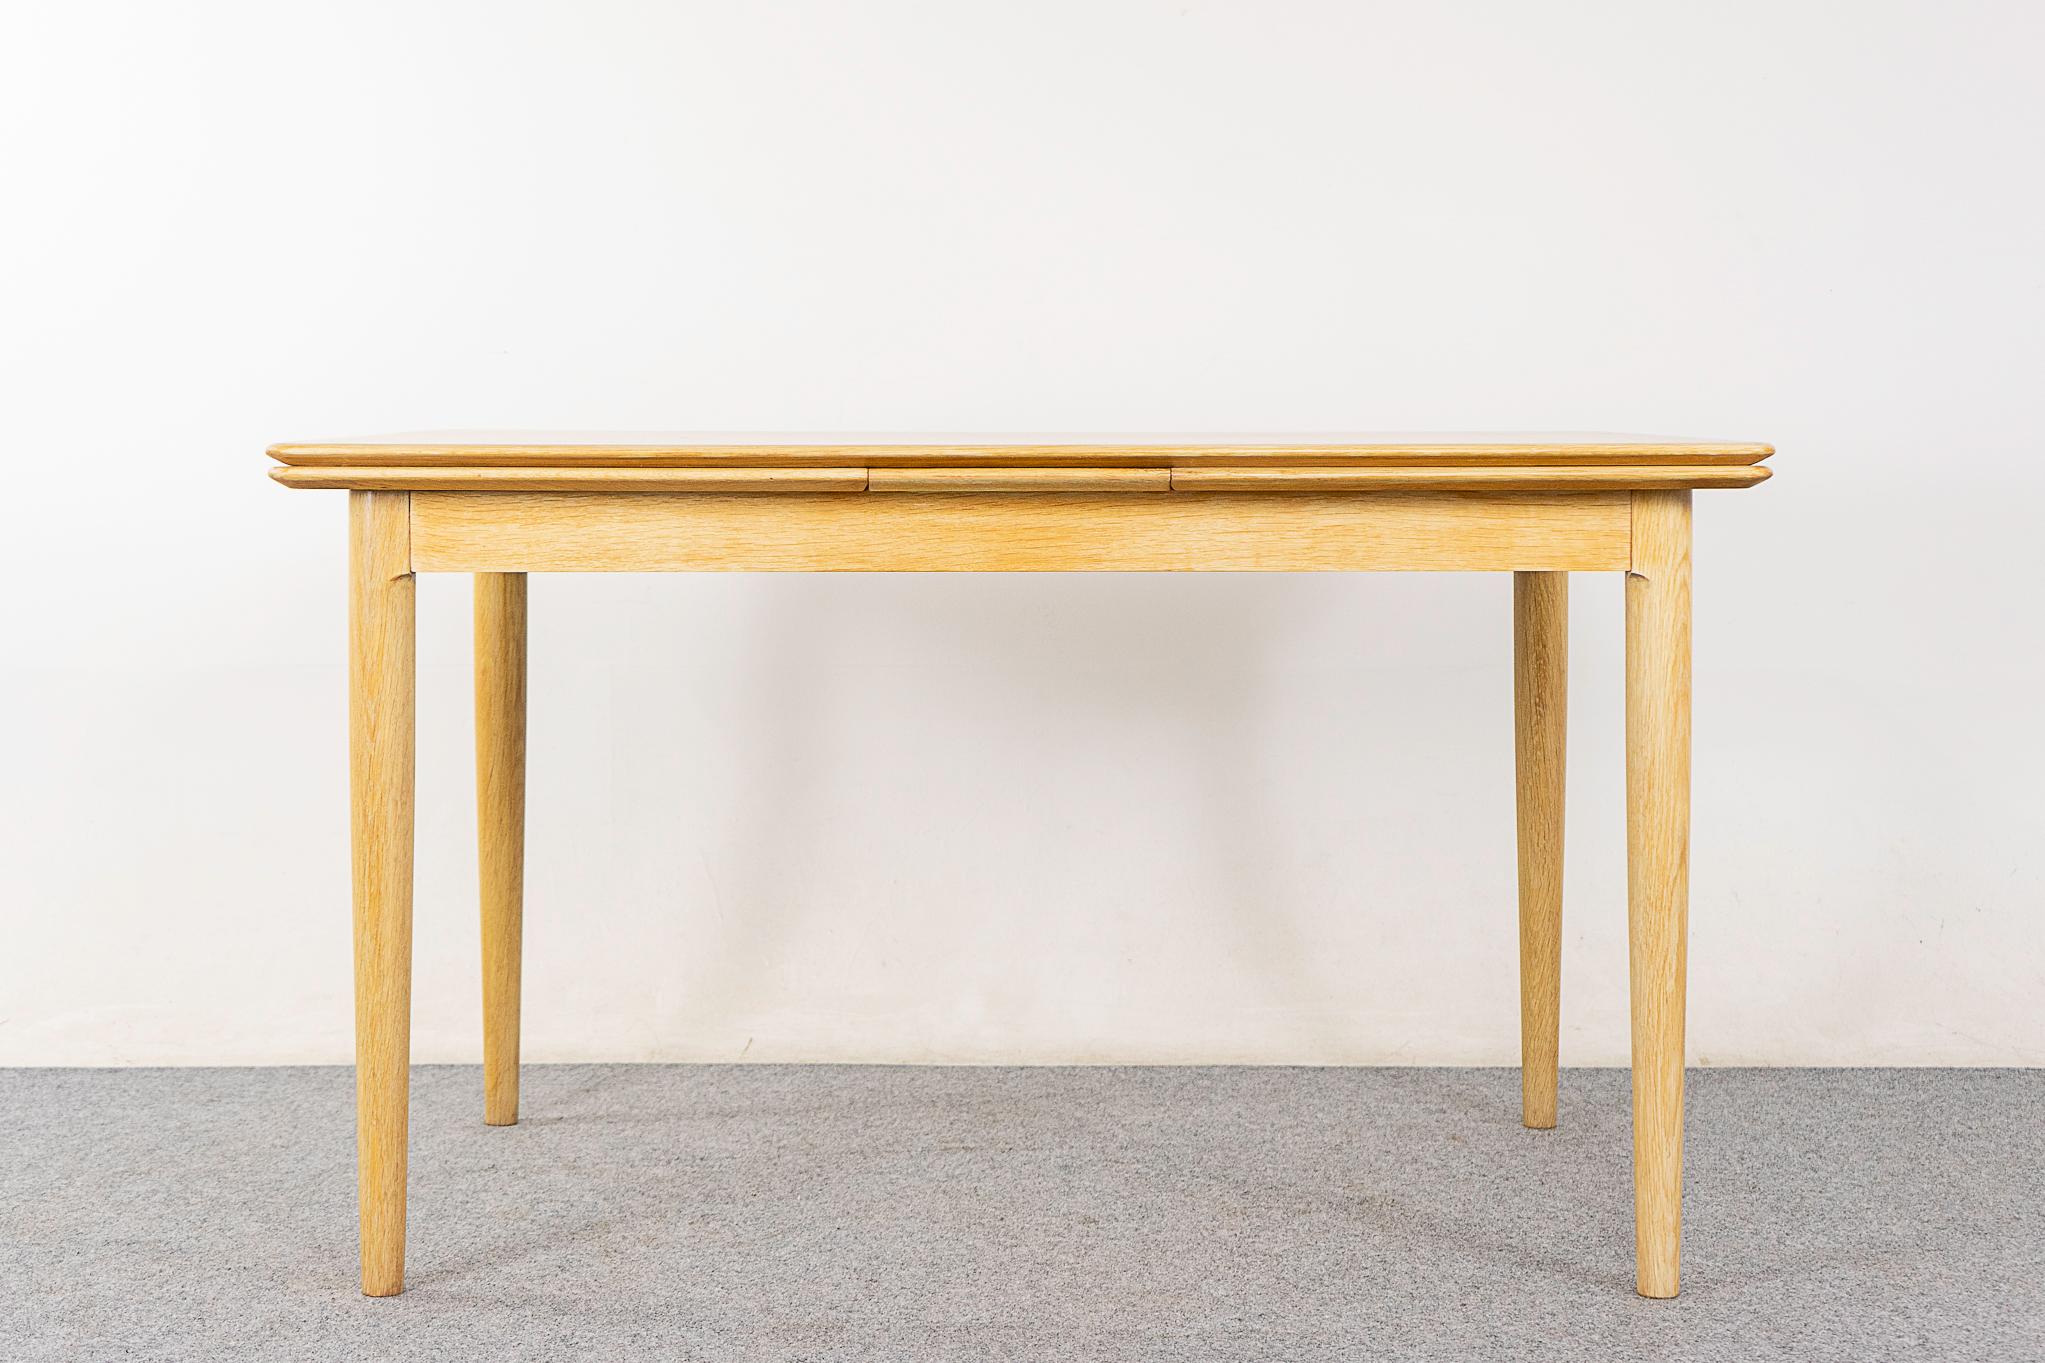 Oak Danish dining table by Skovmand & Andersen, circa 1960's. The blonde and beautiful! Edges are generously framed in solid wood, center panels are highly figured book-matched veneer. Self-storing draw leaves slide out to extend the surface by